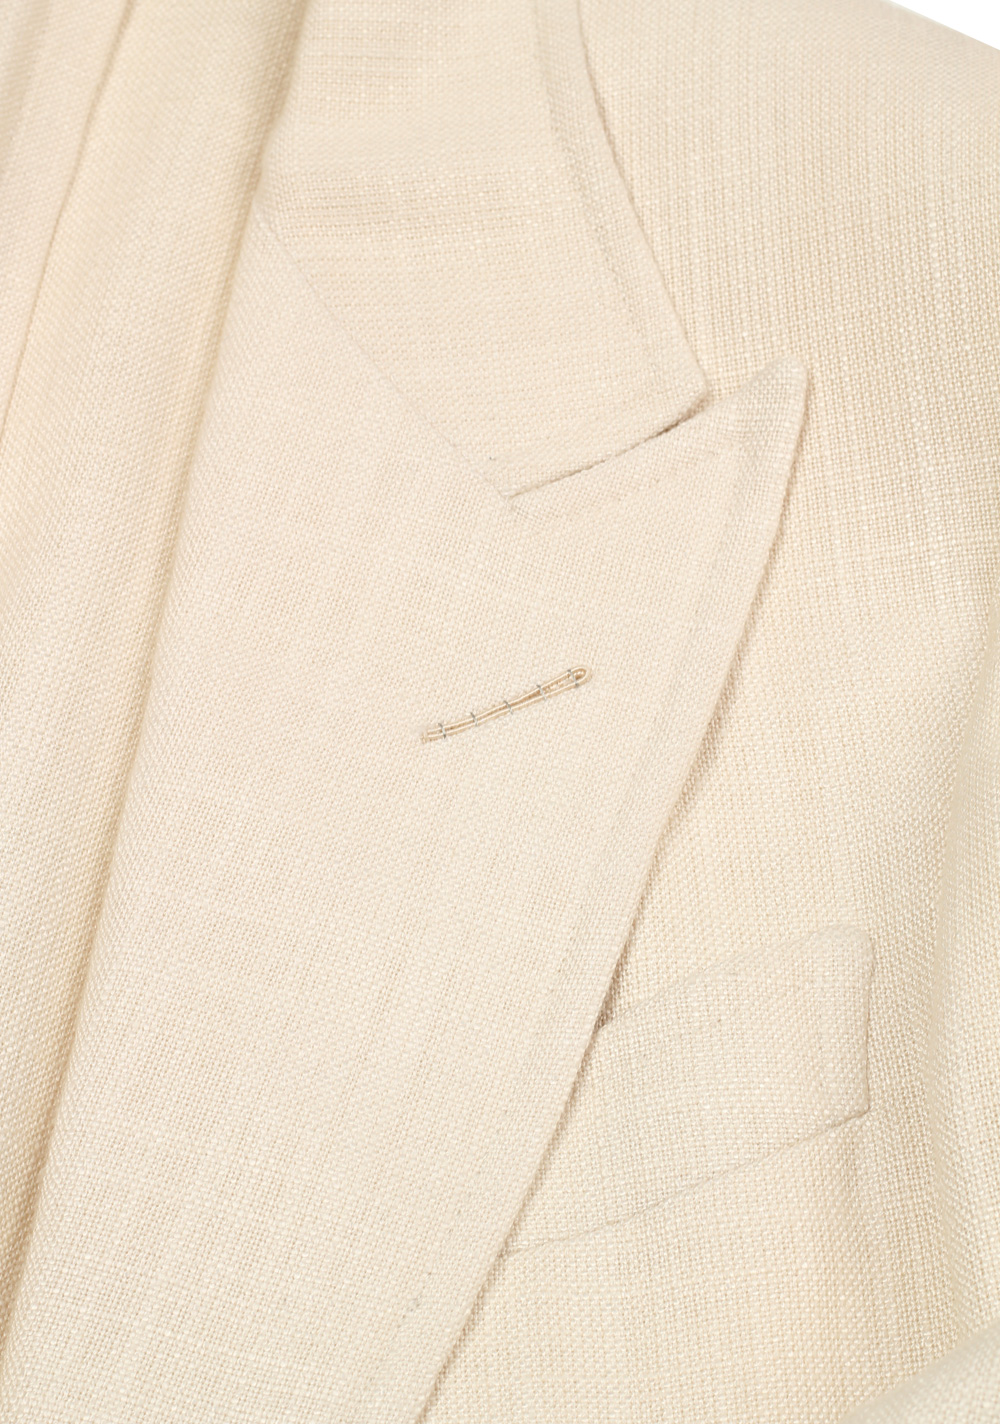 TOM FORD Shelton Cream Suit Size 46 / 36R U.S. In Rayon | Costume Limité